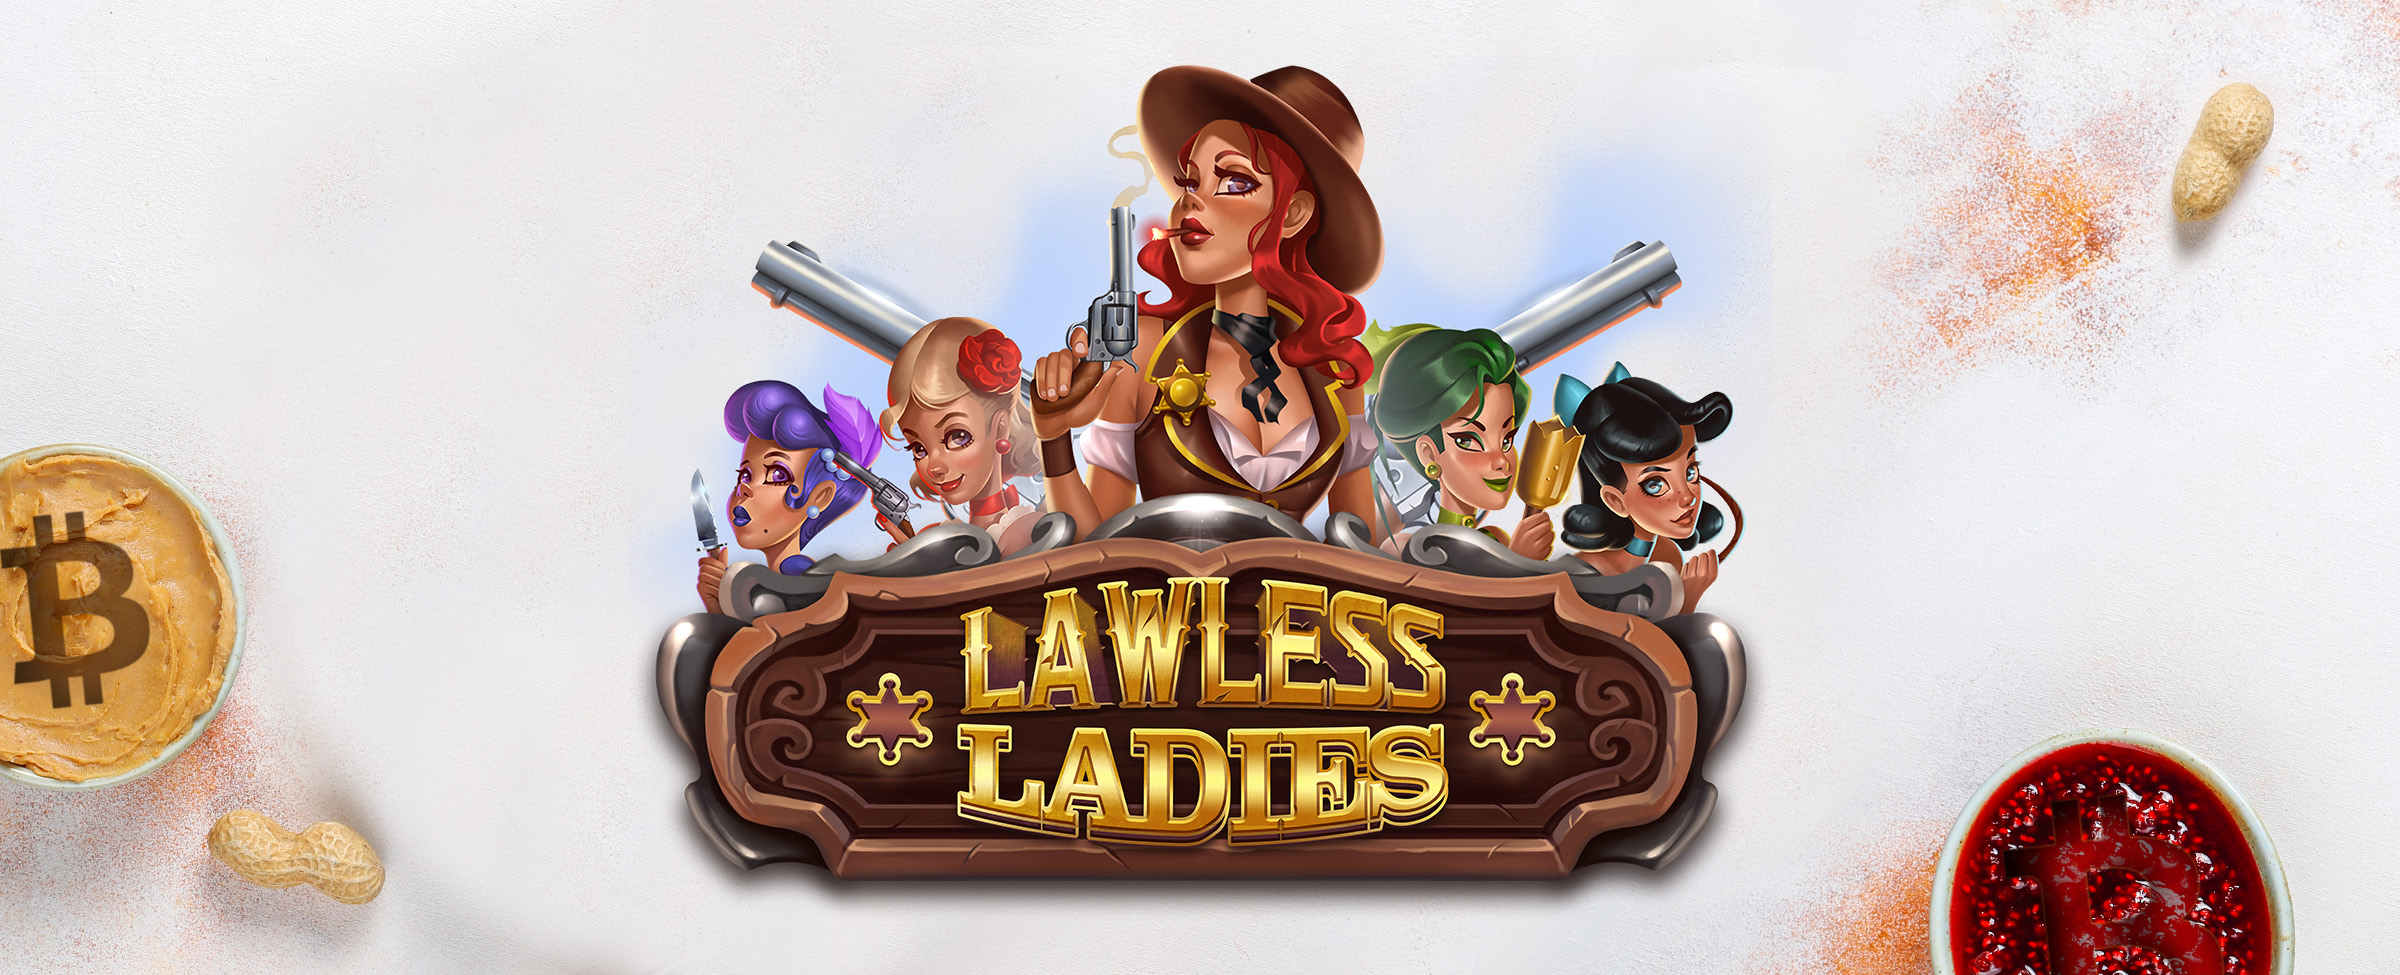 The main thematic logo from the Cafe Casino slot game, Lawless Ladies, is seen in the middle, and includes five female characters from the game. To the bottom left of the image is a peanut butter latte with a bitcoin ‘B’ stamped on top, while to the bottom right, is a coffee mug filled with red liquid and a bitcoin ‘B’ also stamped on top.